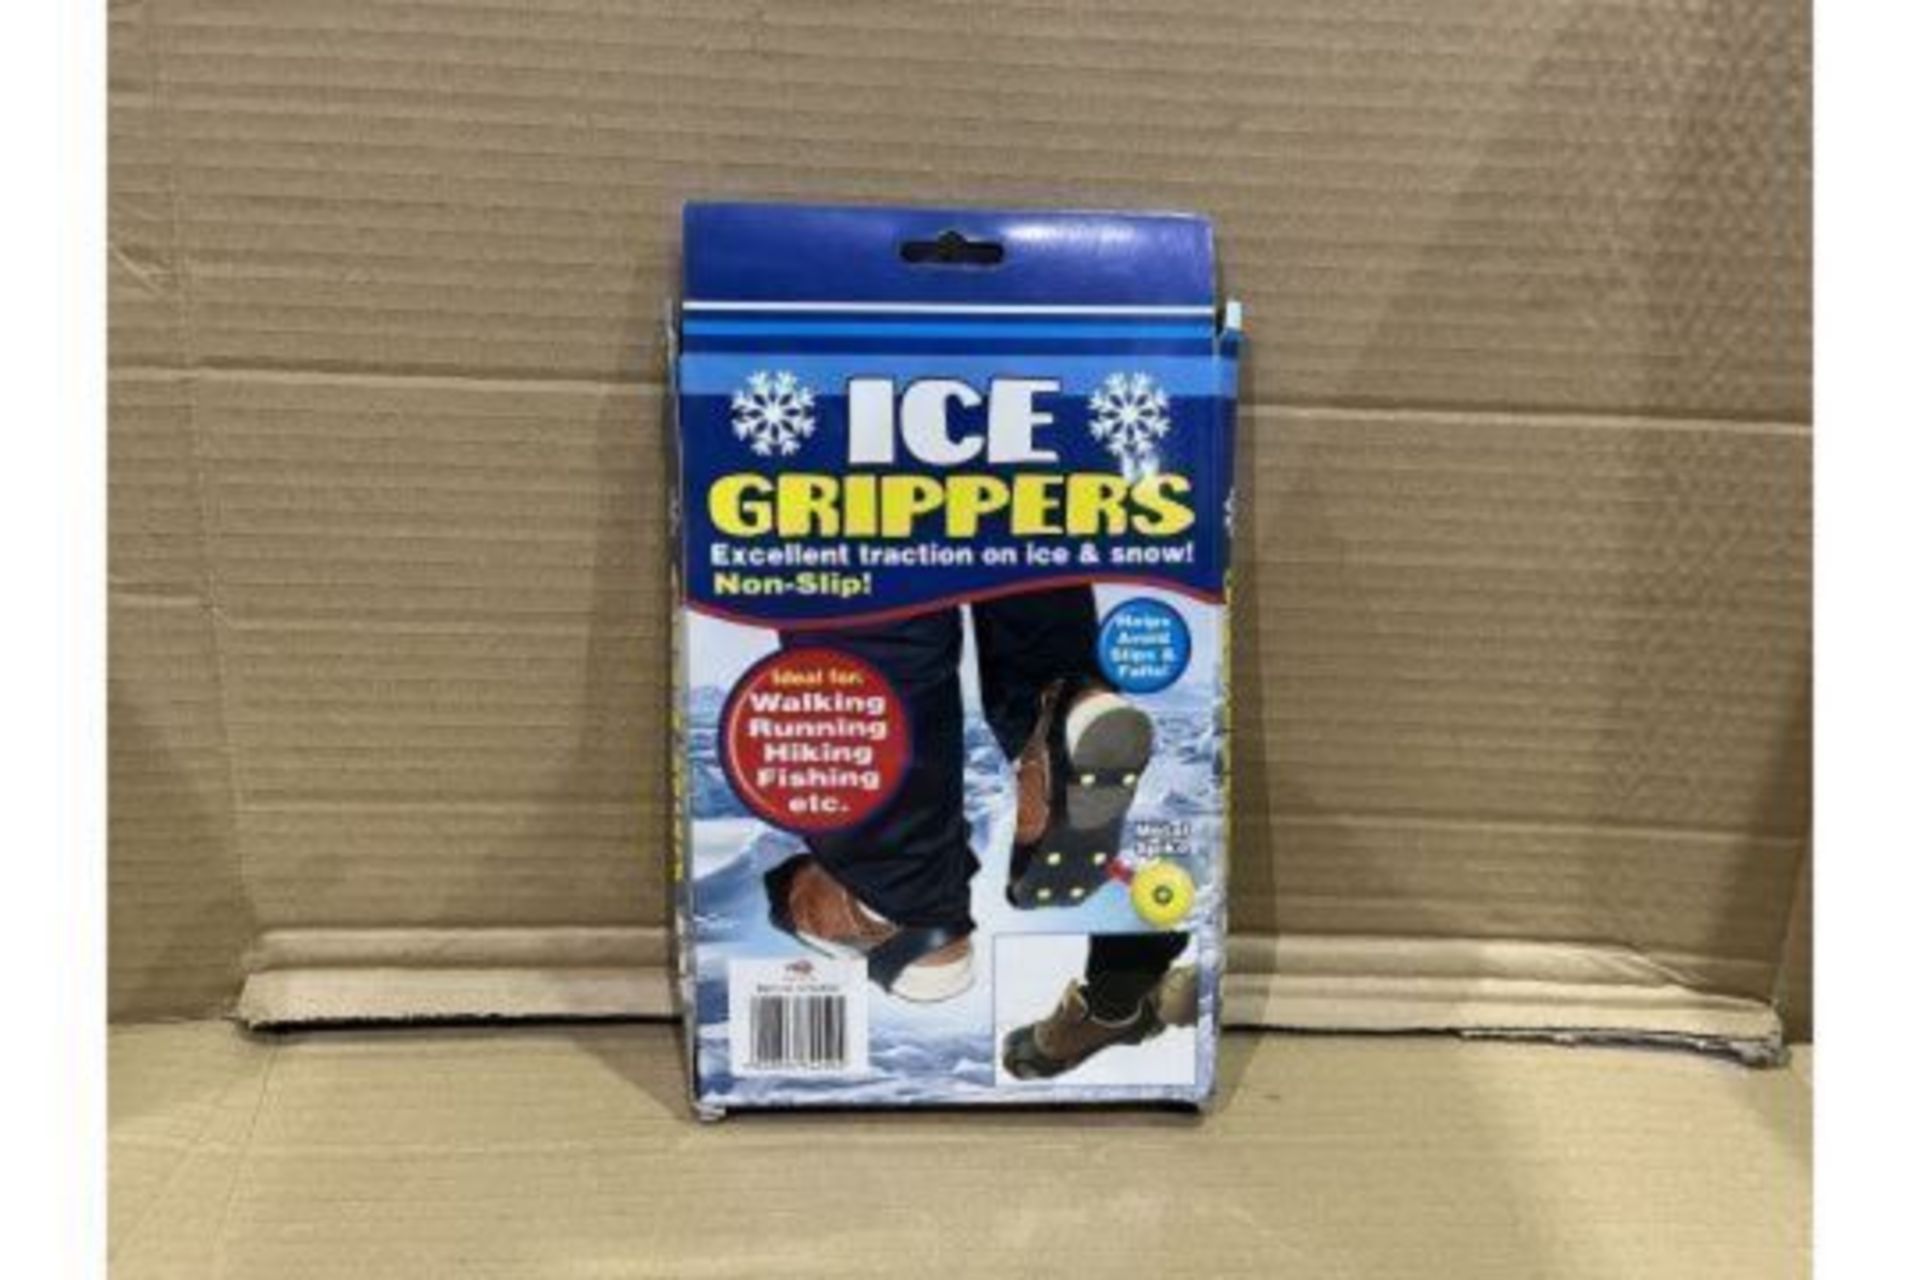 96 X BRAND NEW ICE GRIPPERS R10-7